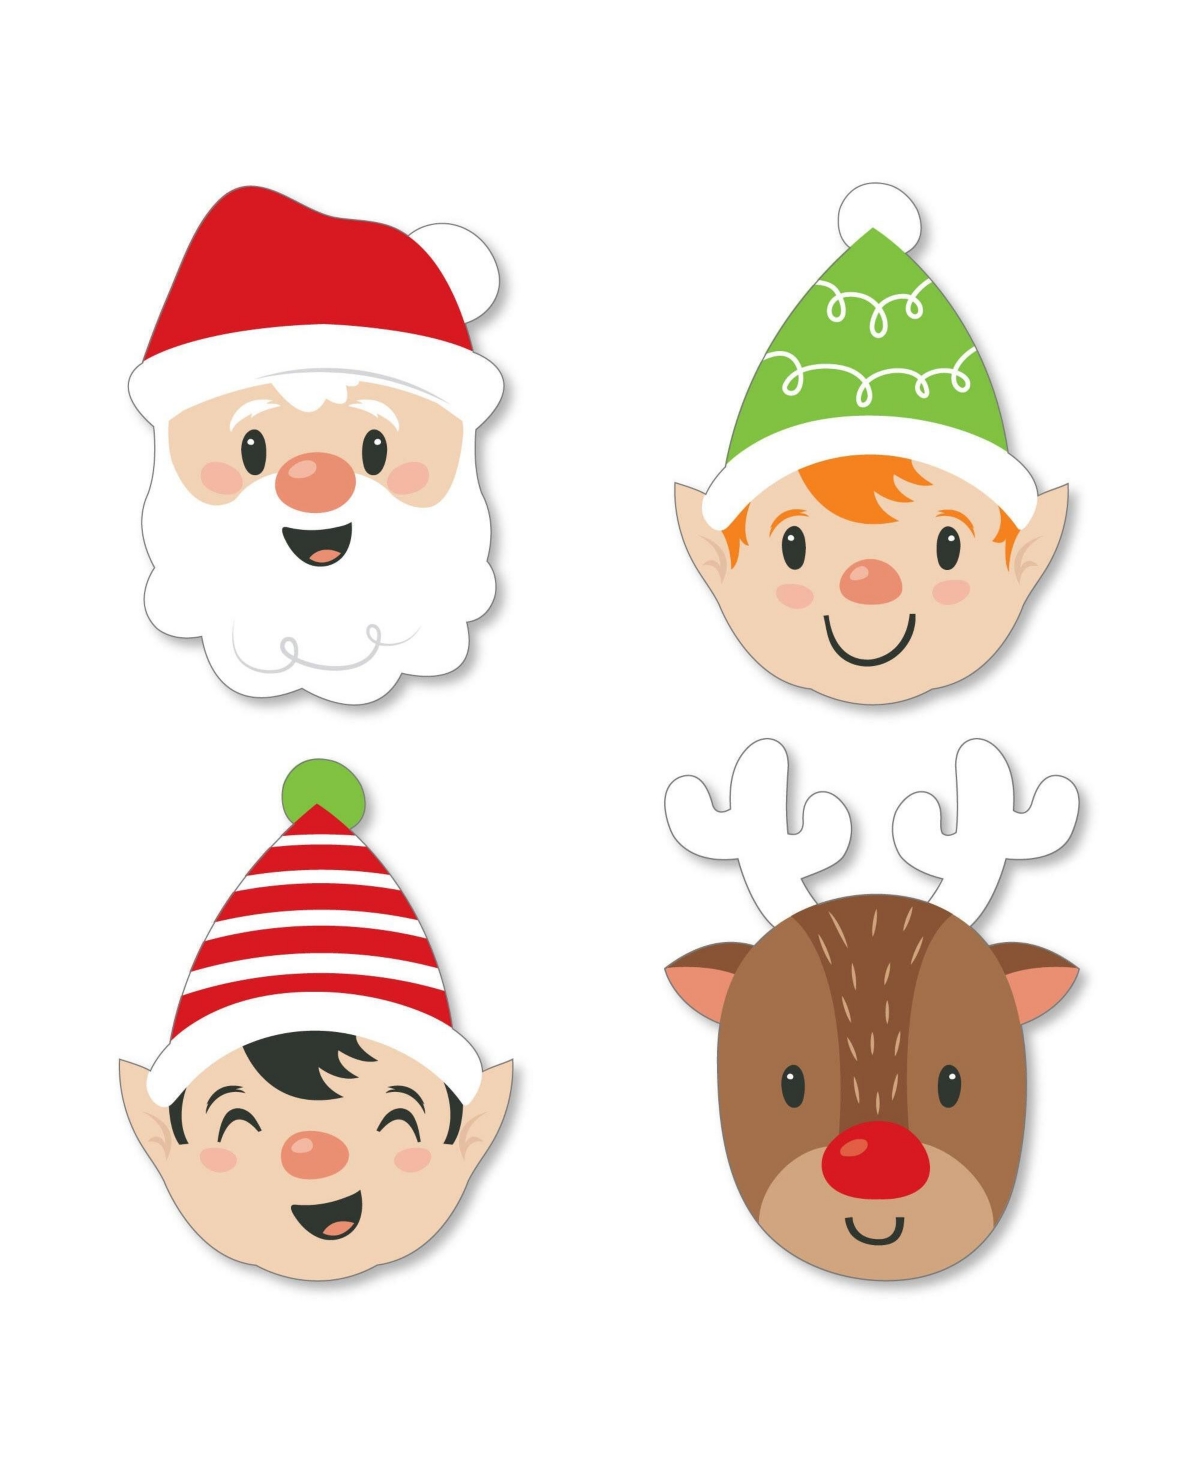 Very Merry Christmas - Diy Shaped Holiday Santa Claus Party Cut-Outs - 24 Ct